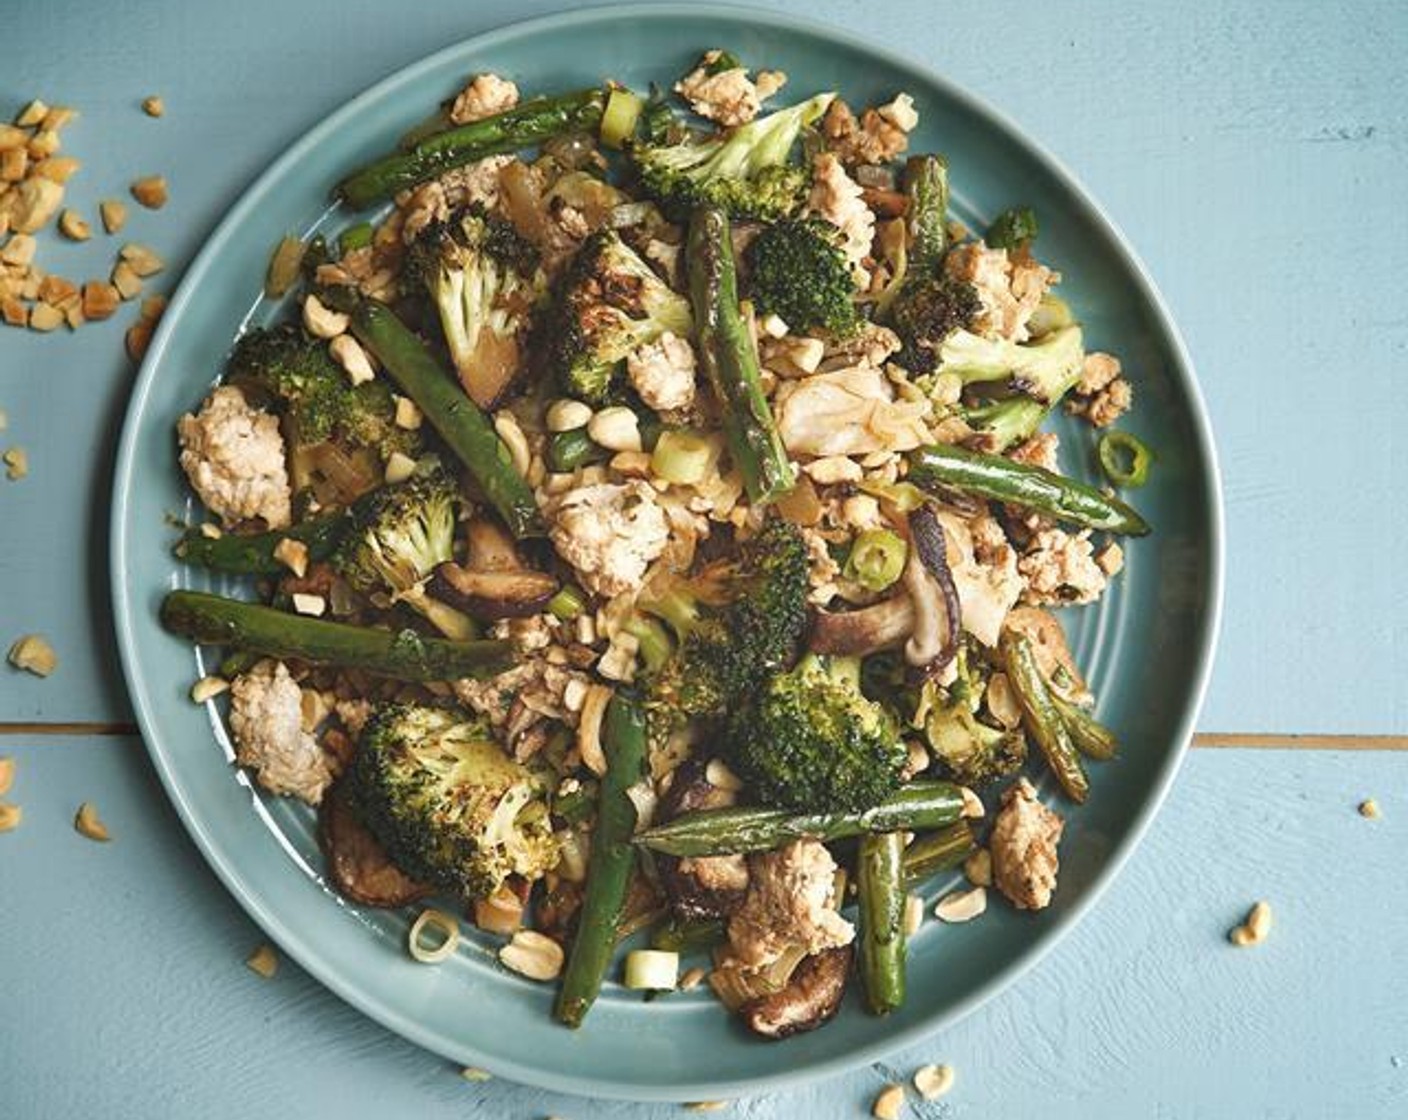 Chicken Stir-Fry with Green Beans and Broccoli